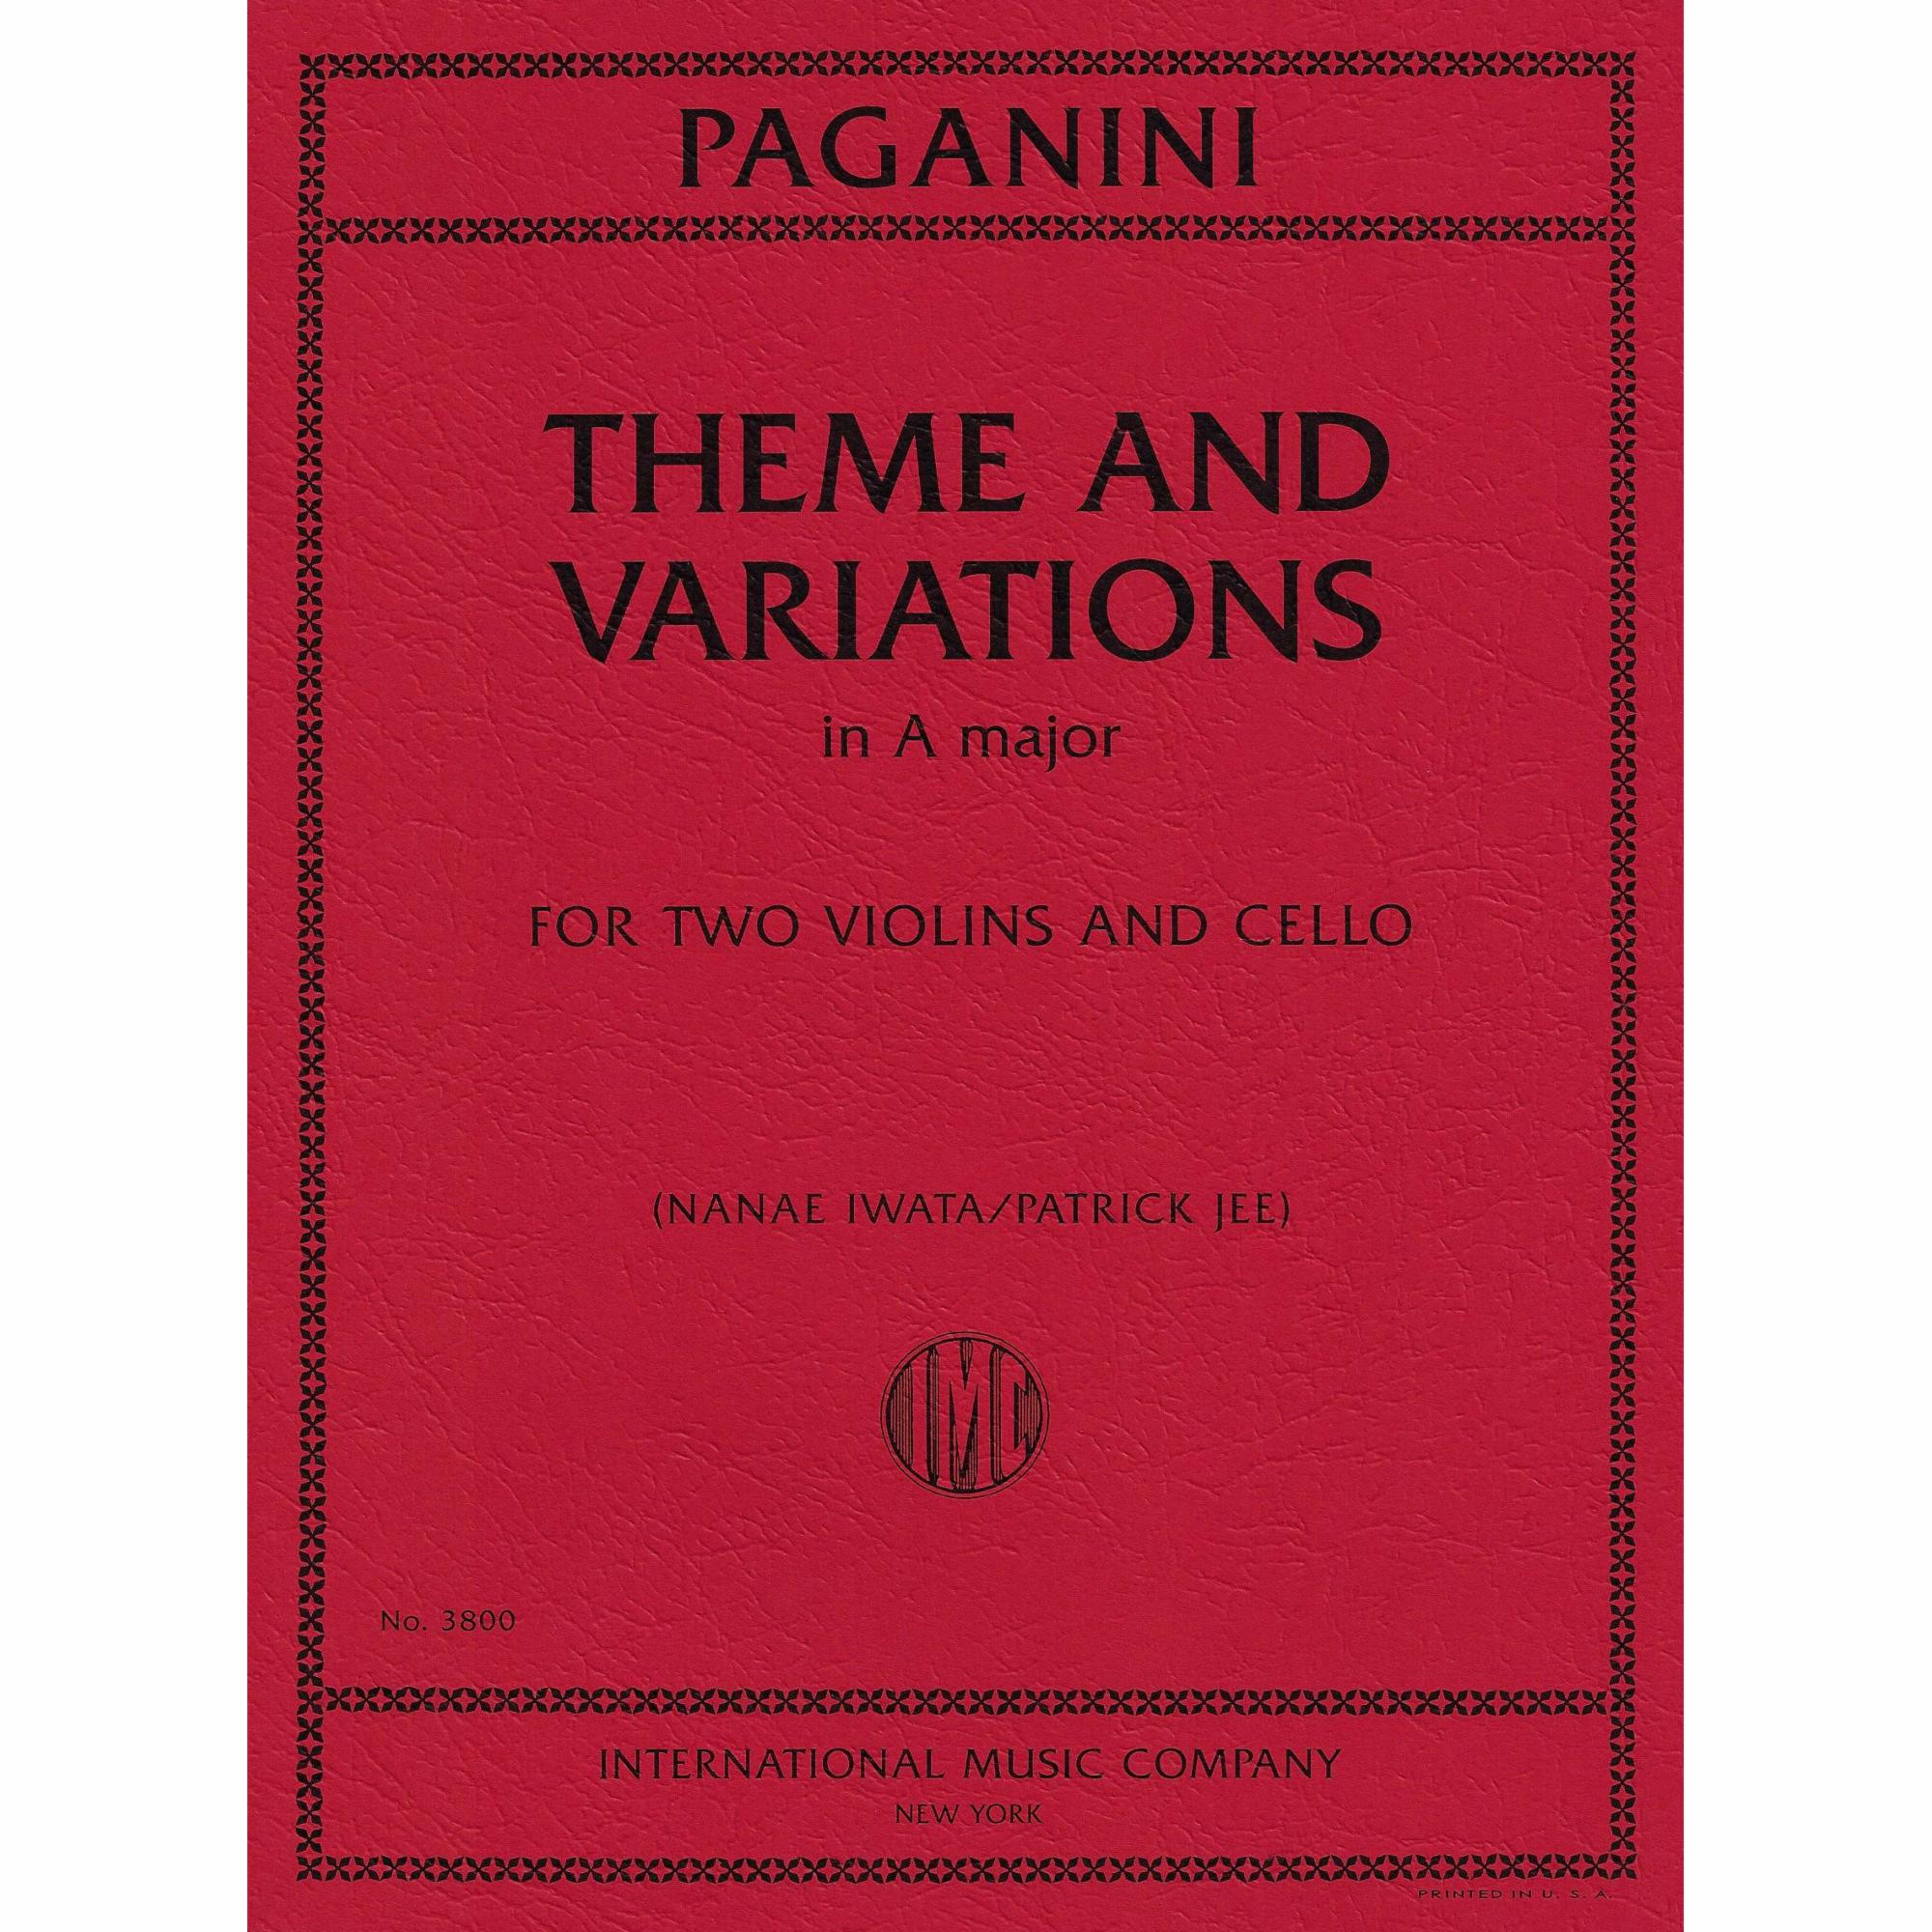 Paganini -- Theme and Variations in A Major for Two Violins and Cello